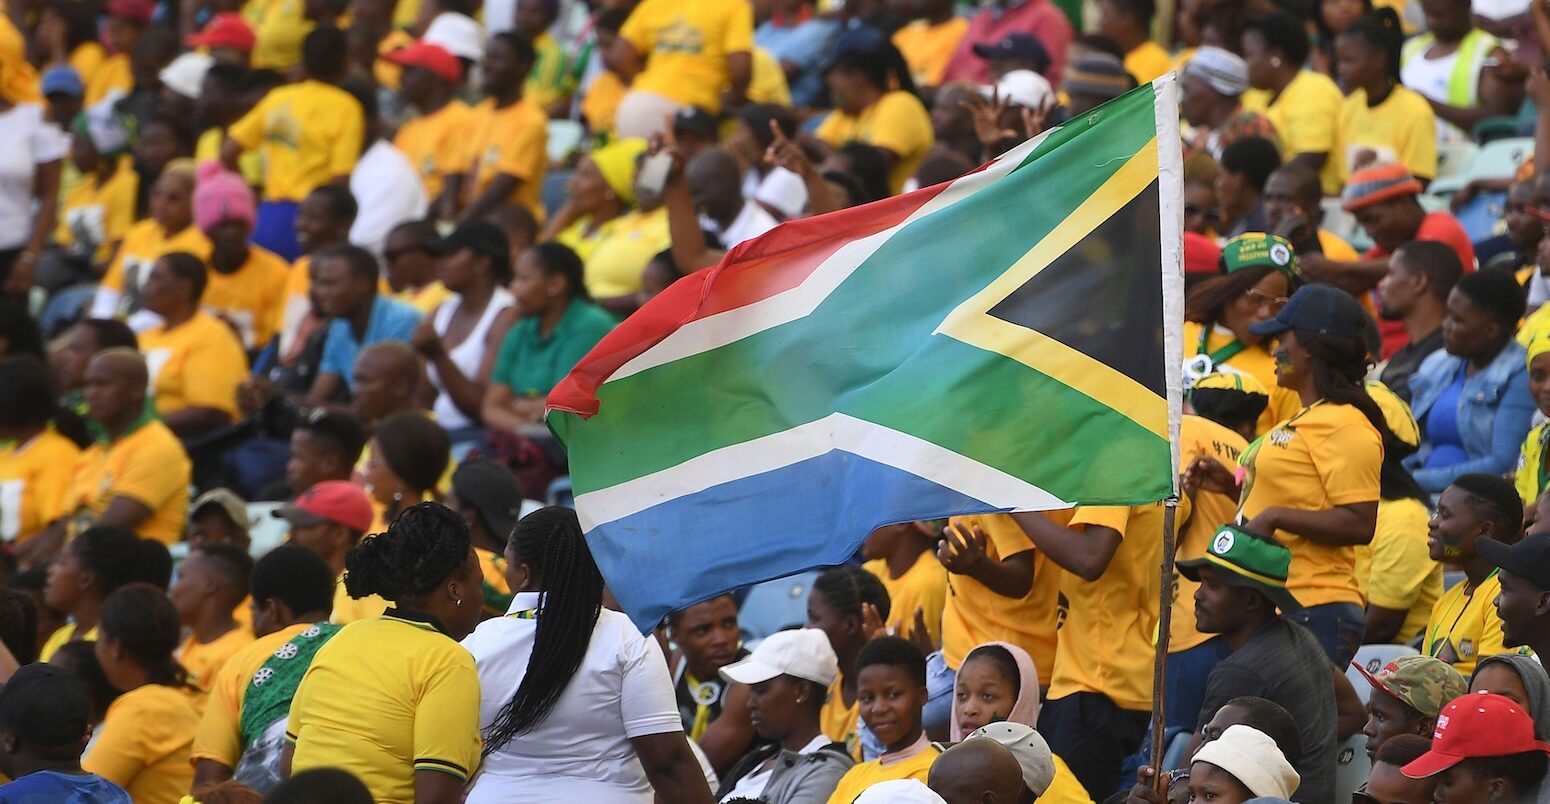 Members of the ANC gather at the Moses Mabhida stadium in Durban, South Africa, 12 January 2019.